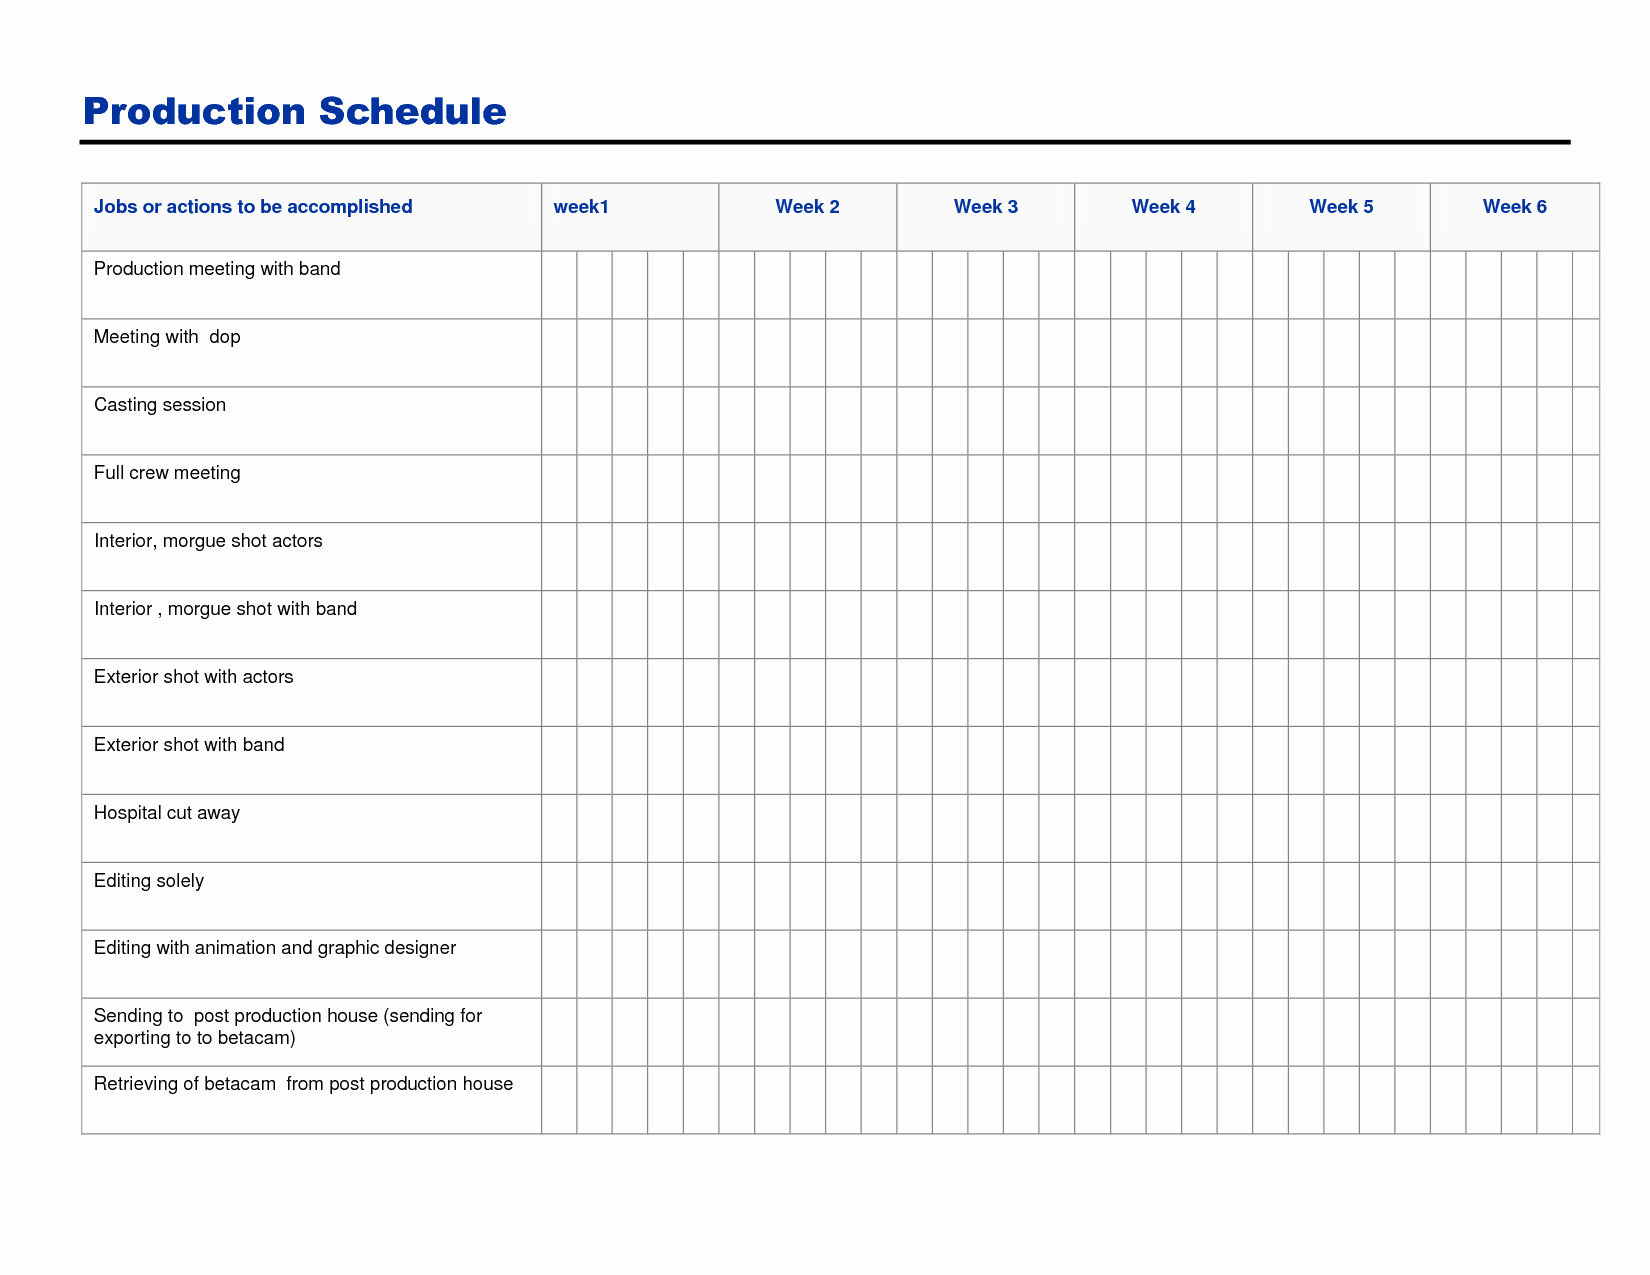 Manufacturing Production Schedule Template New Production Schedule Template